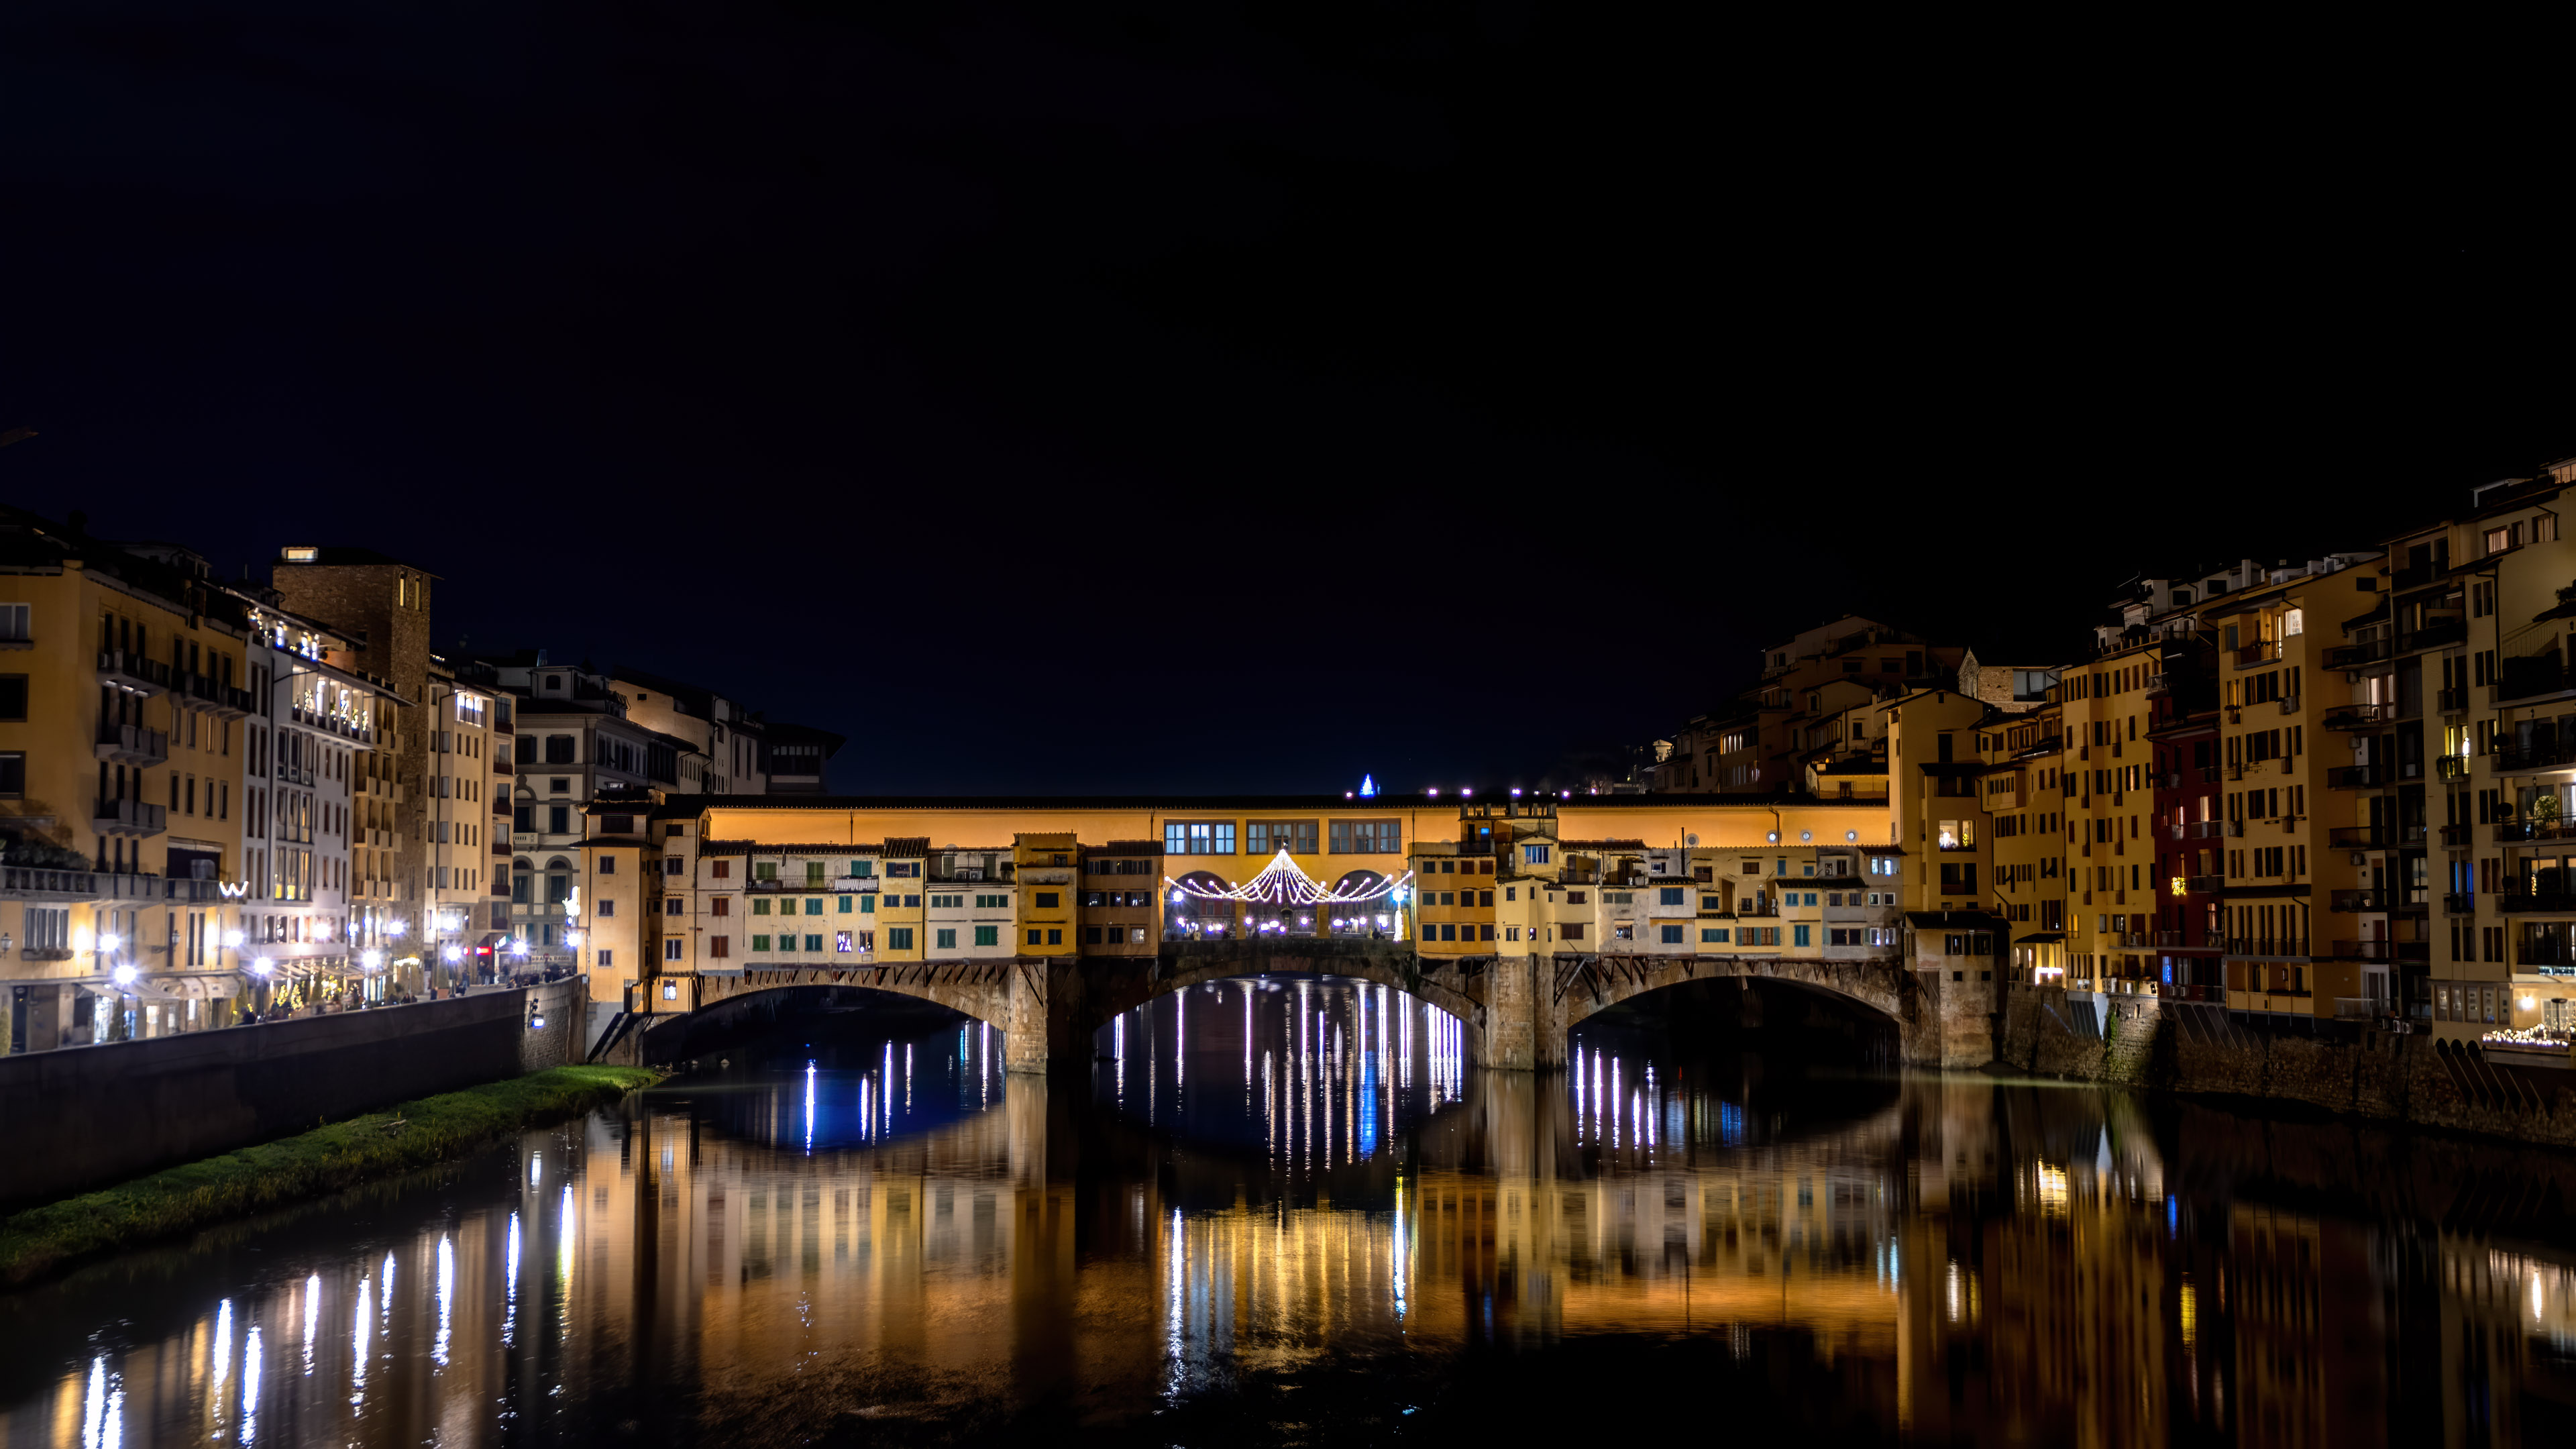 Transform your screen with the enchanting night view of Florence, where illuminated buildings and bridges create a magical atmosphere.